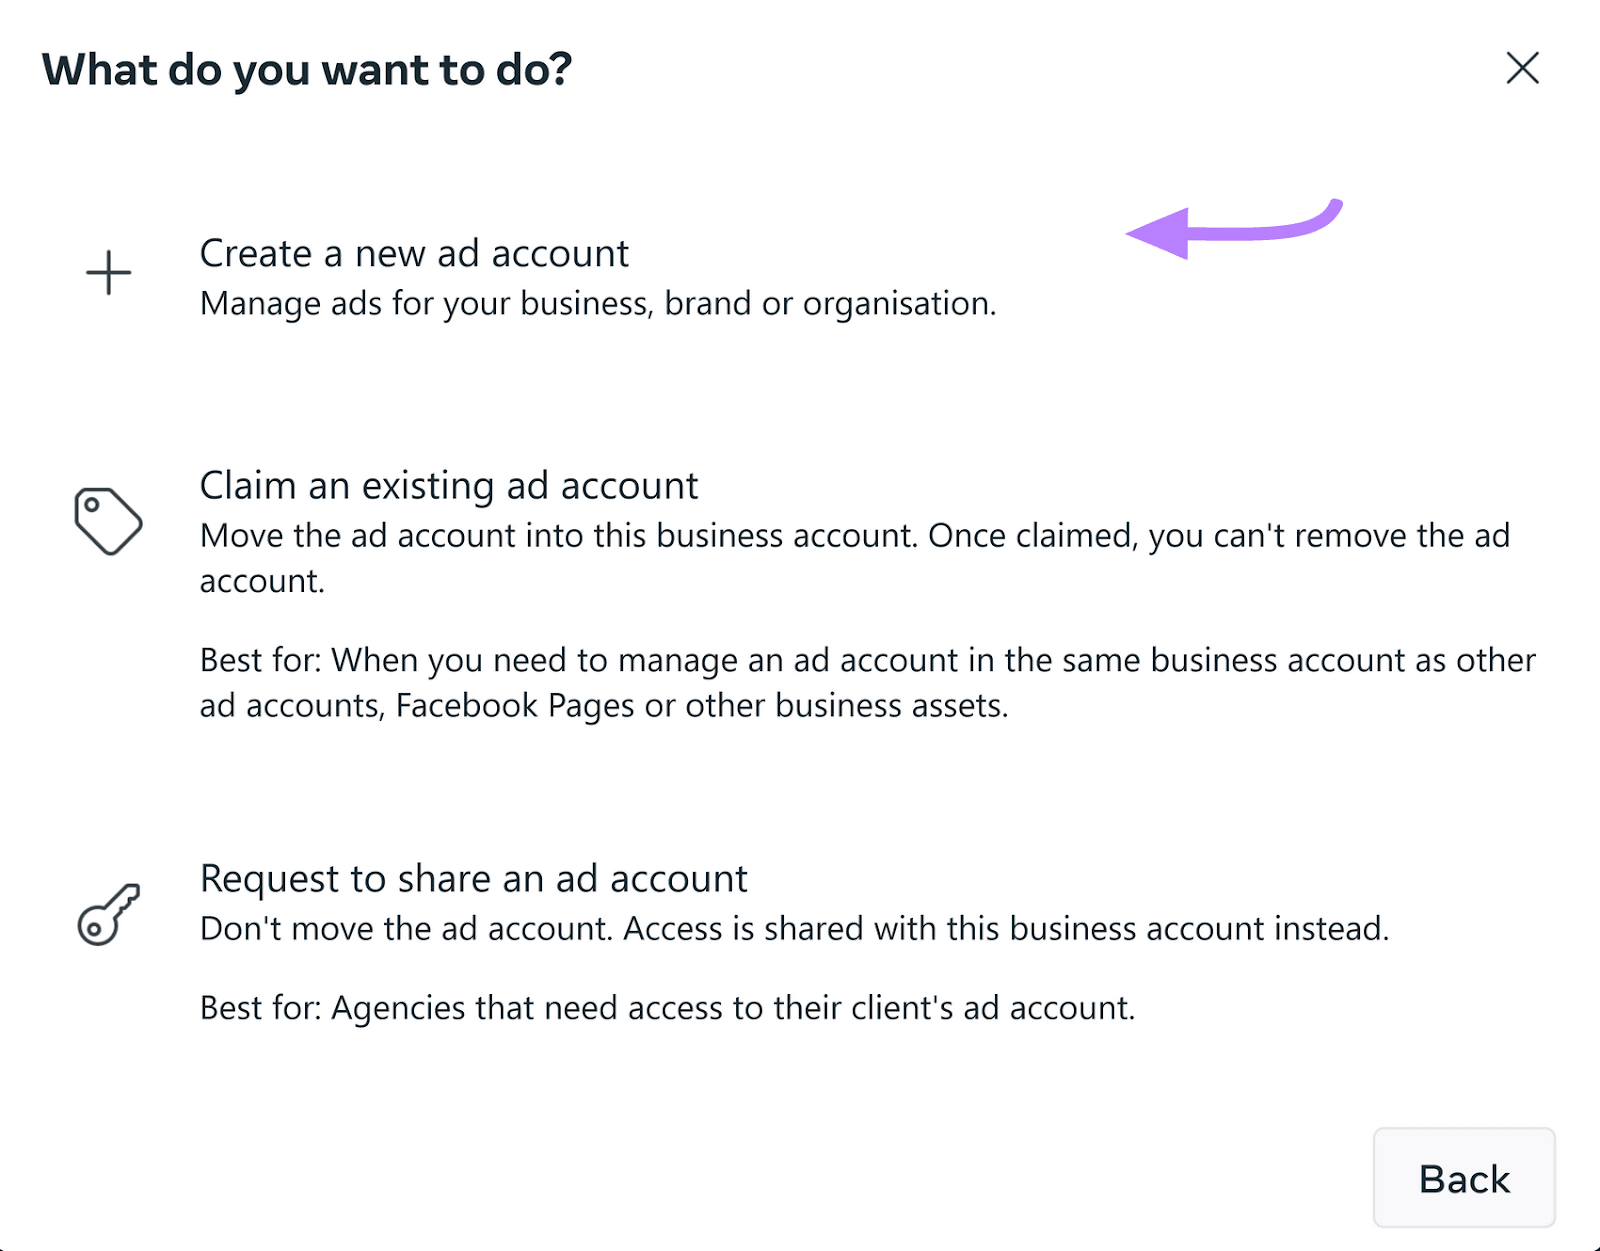 “Create a new ad account" option selected